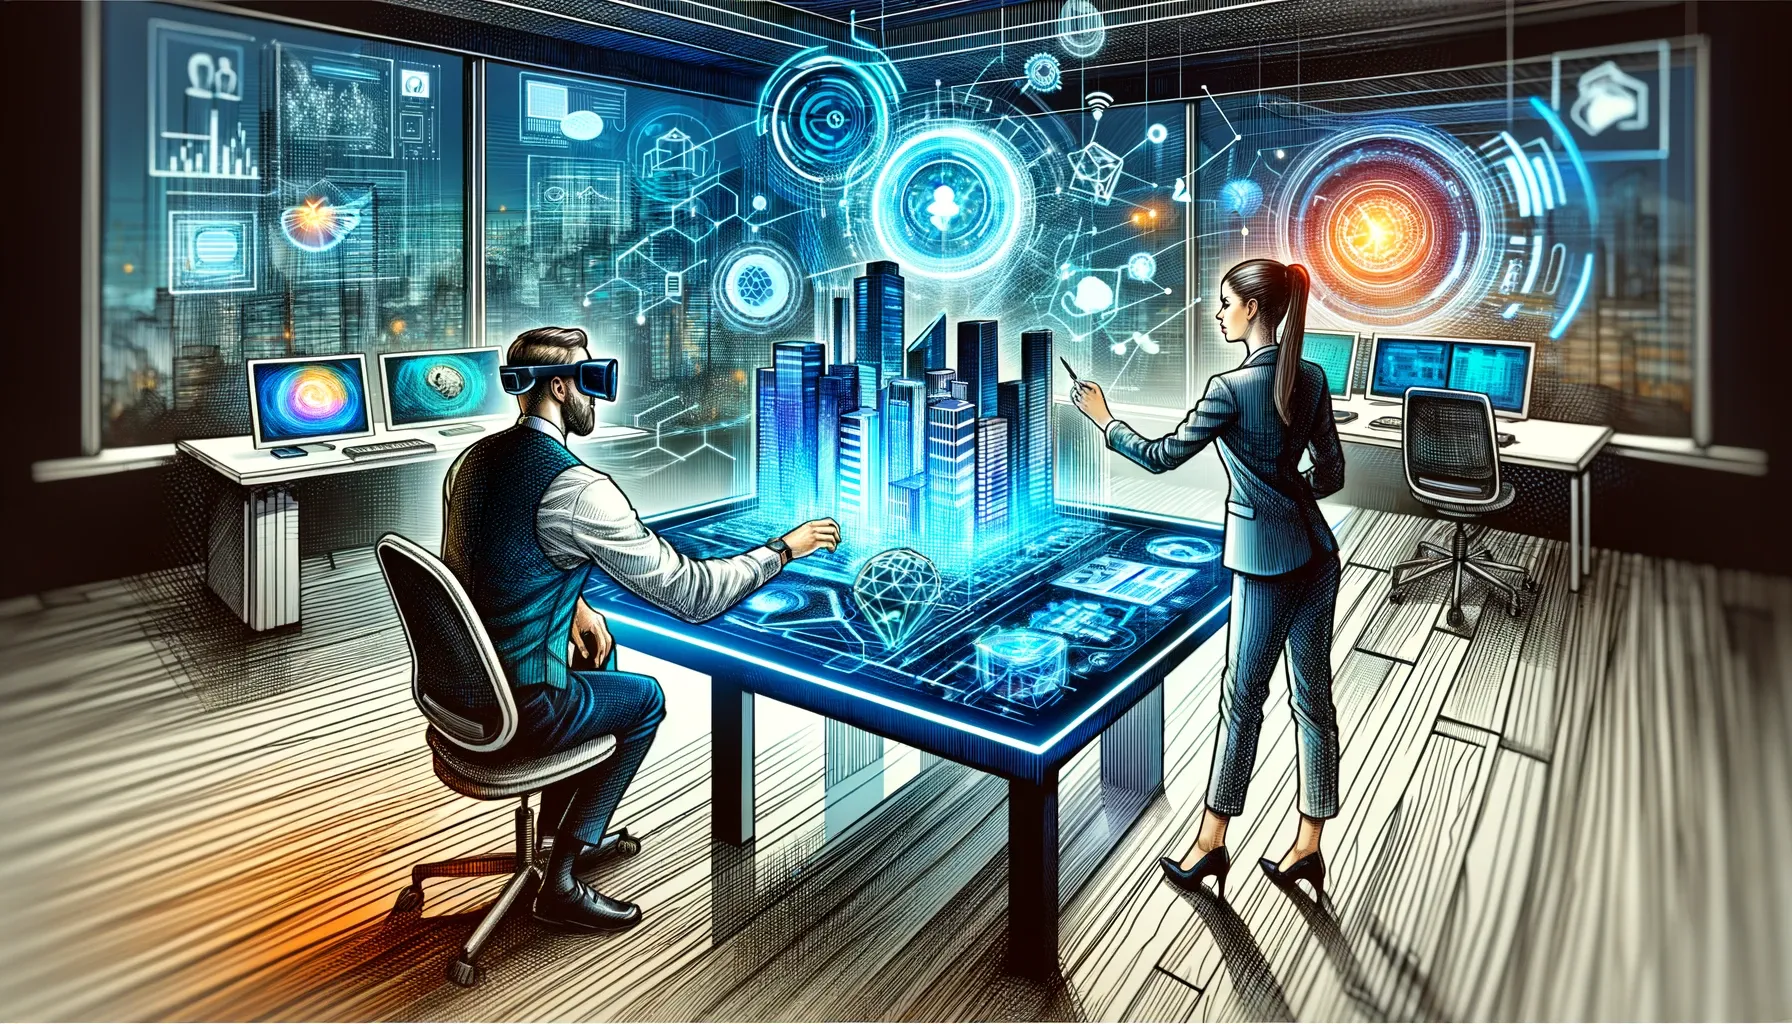  ChatGPT A woman and a man with virtual reality headsets interacting with a 3D holographic cityscape projection in a futuristic office setting.